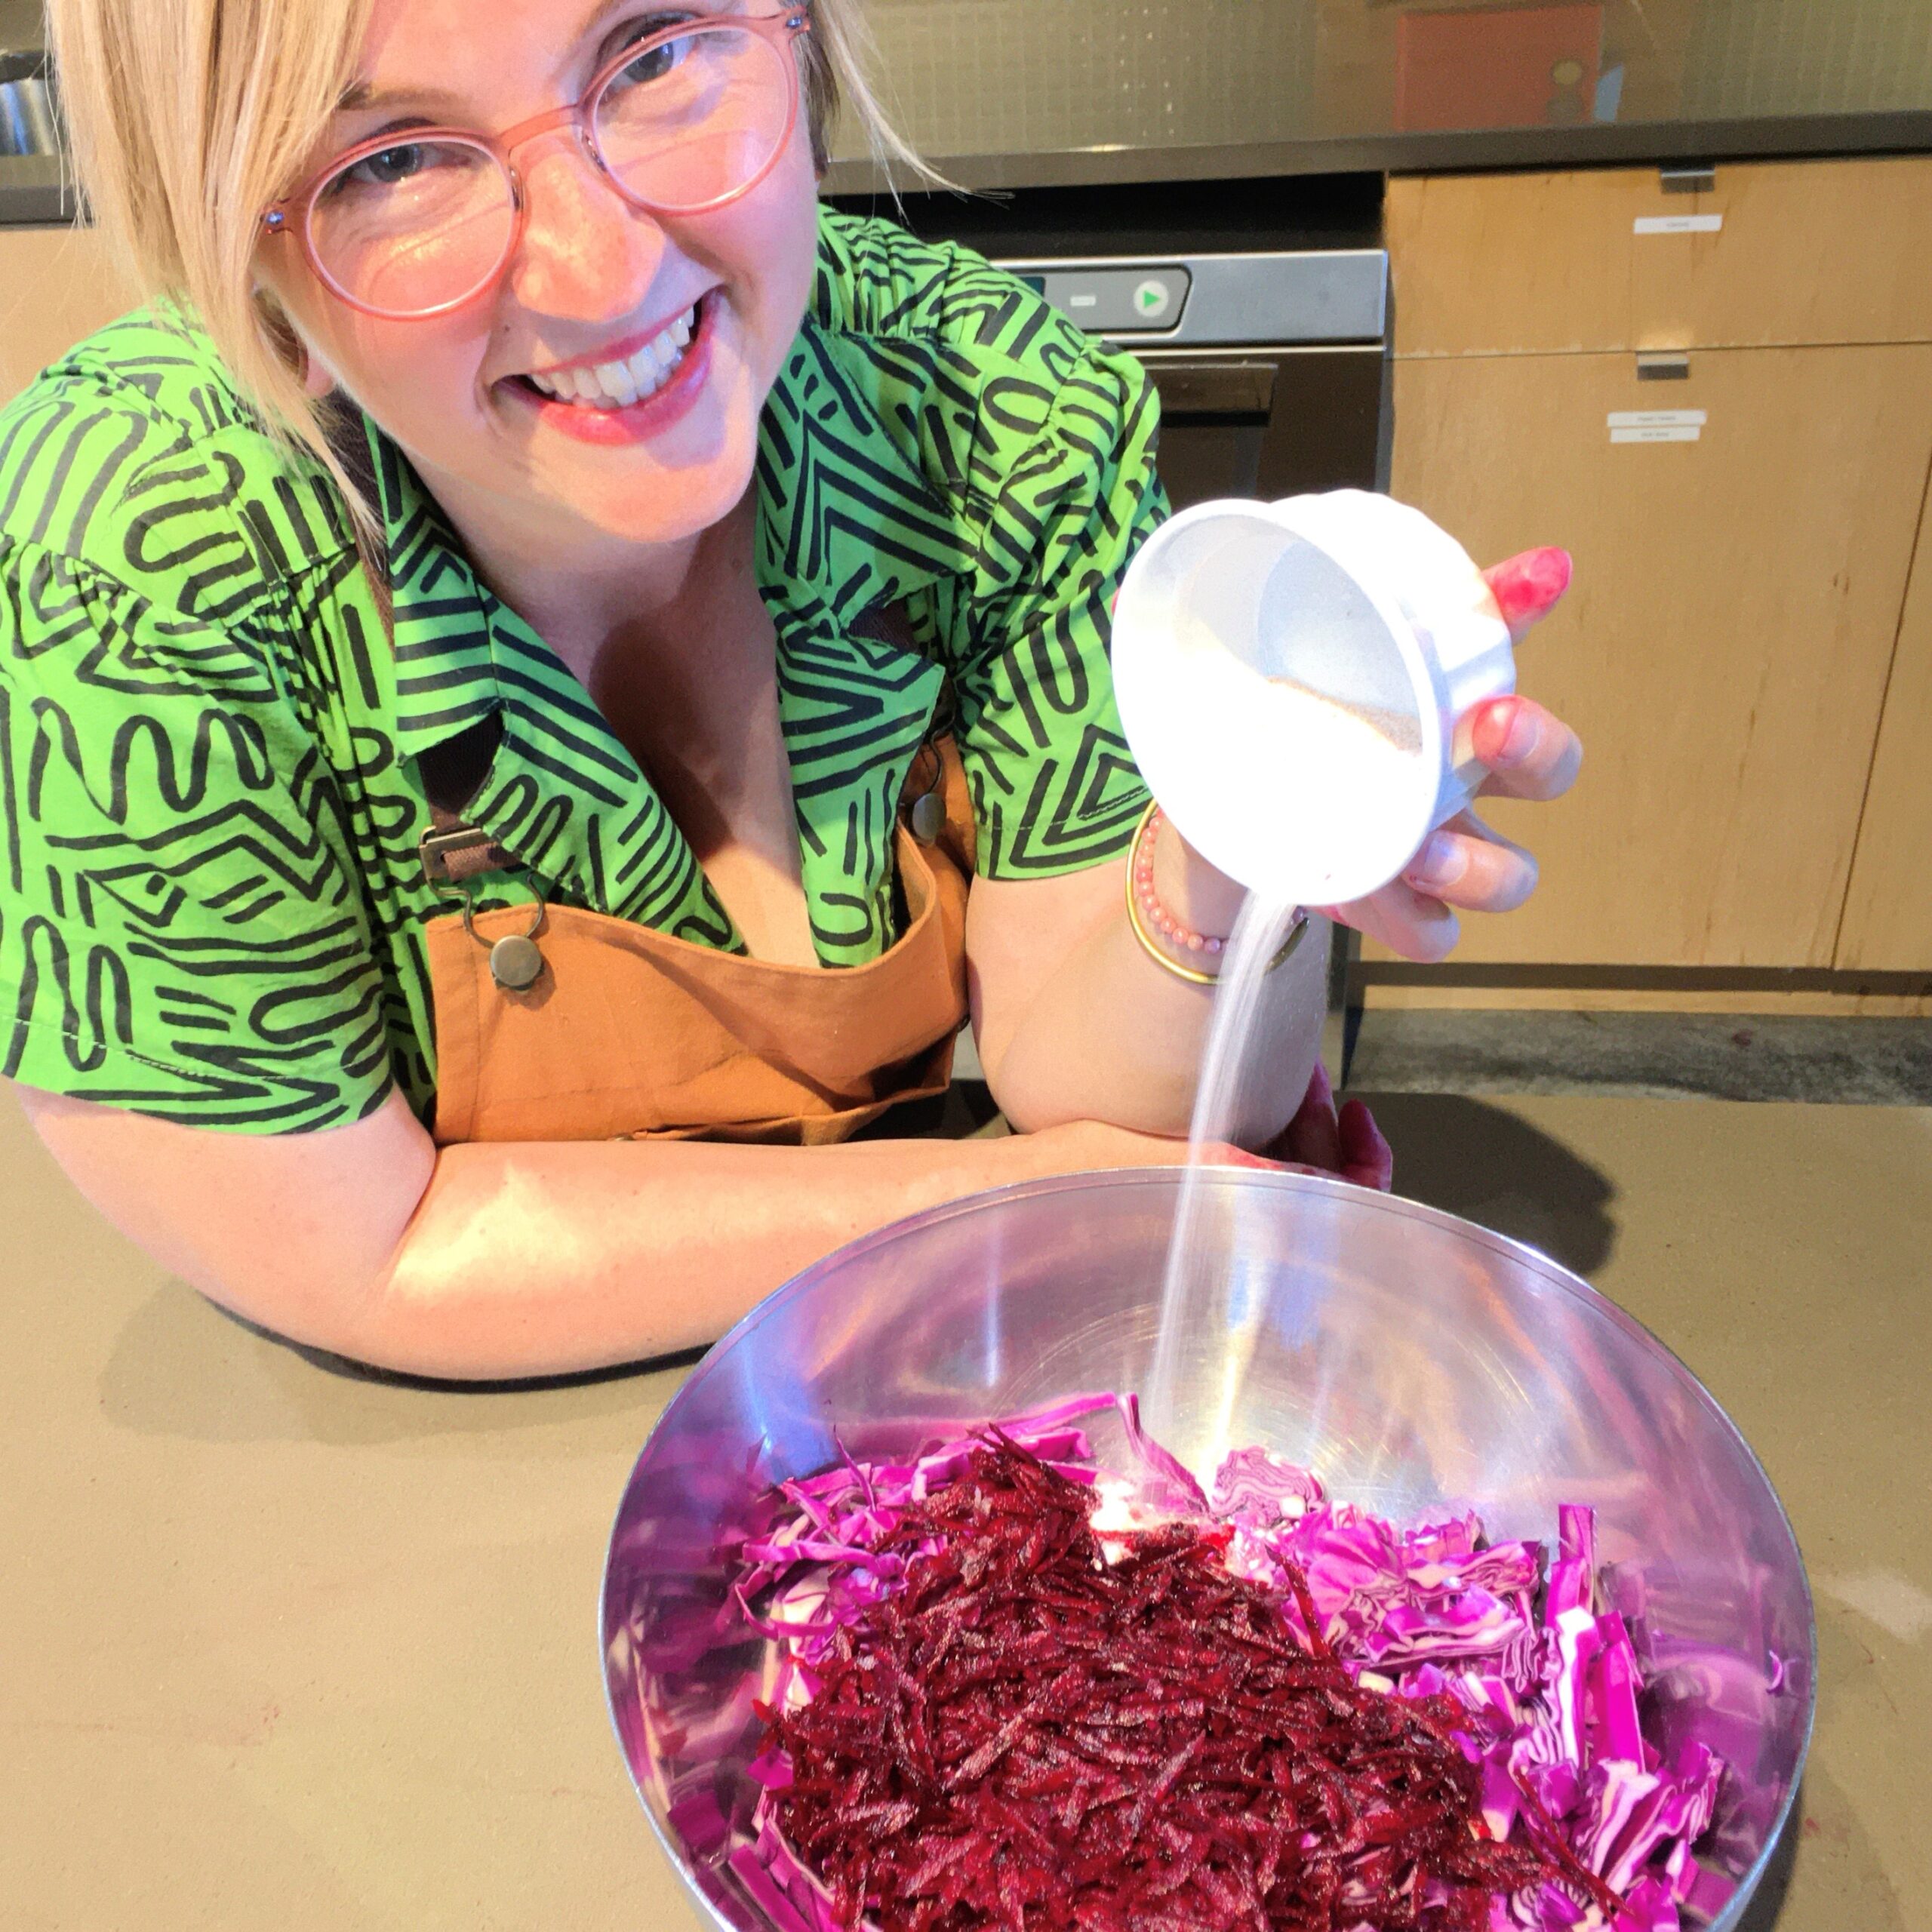 Assistant Professor of Nutrition, Dr. Chelsie Falk prepares a bowl of beets and shredded cabbage, which will ferment over time into sauerkraut. Fermentation is a cooking technique she teaches as part of the Healing Foods Practicum in the NUNM Teaching Kitchen.